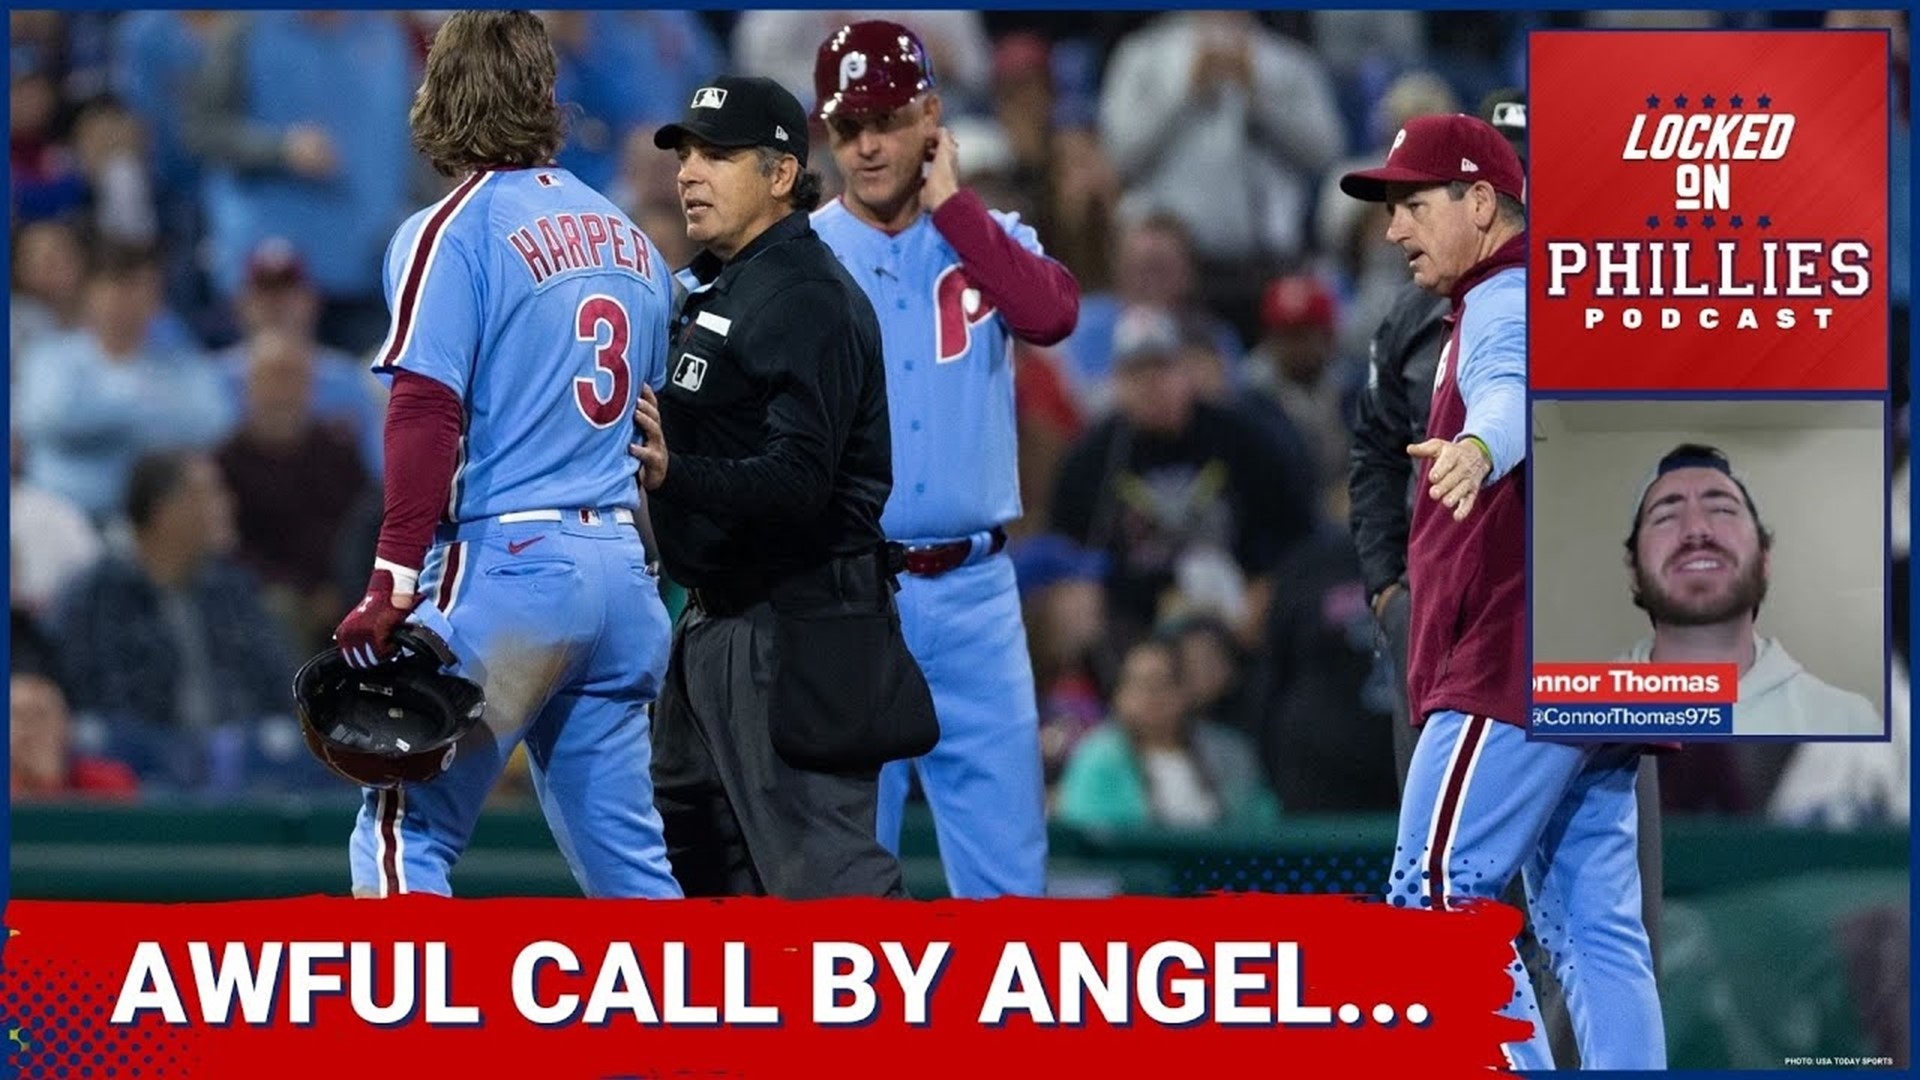 In today's episode, Connor goes to war with the MLB handling of umpires and how terrible umpires like Angel Hernandez are allowed to make awful, game changing calls.